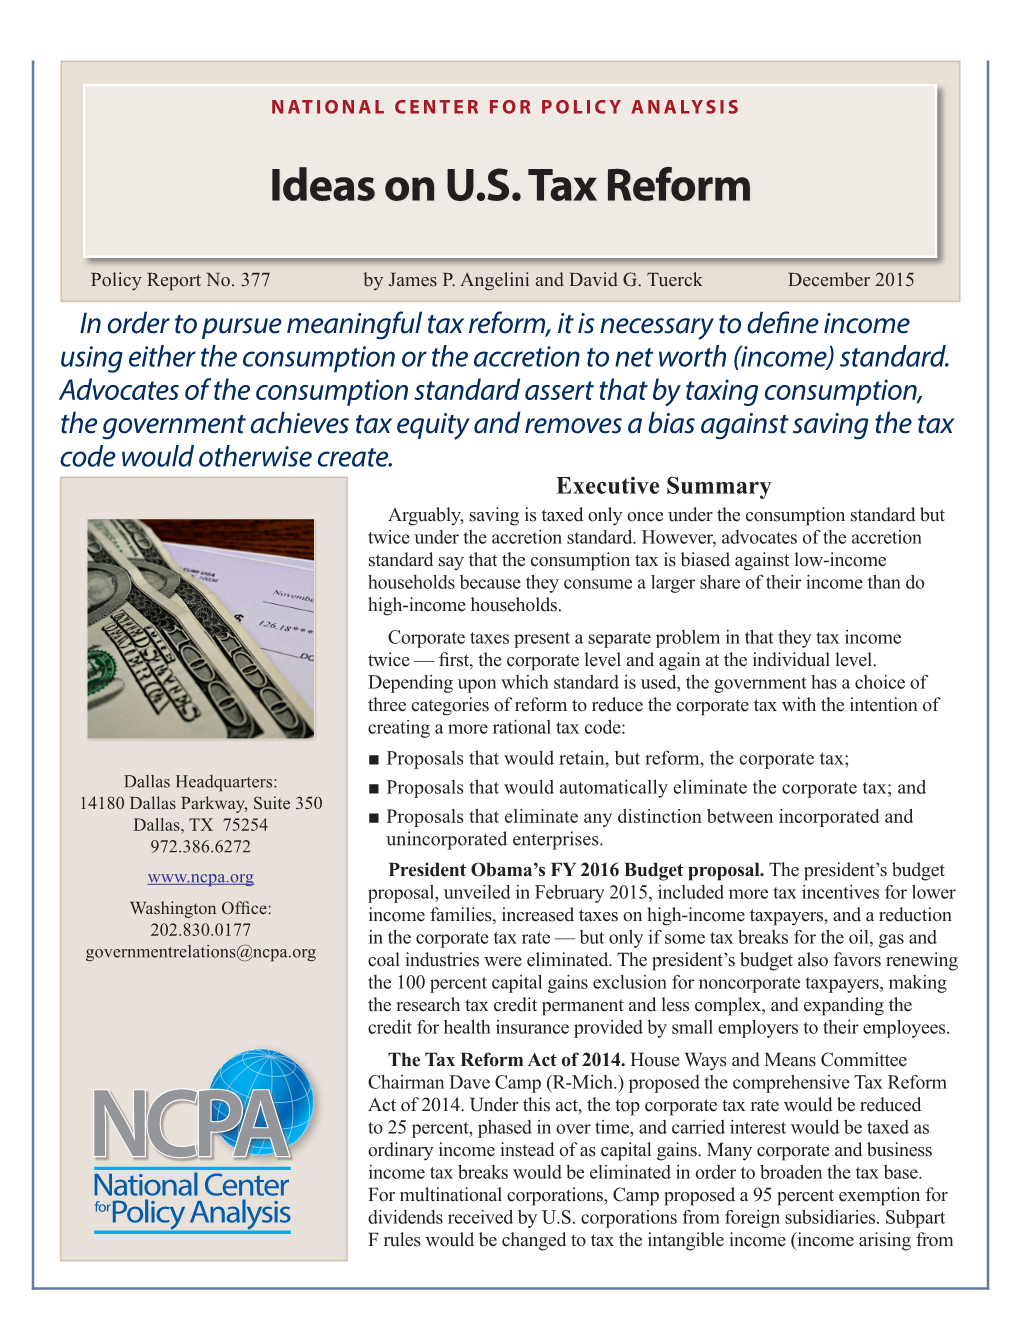 Some Corporate Tax Reform Proposals